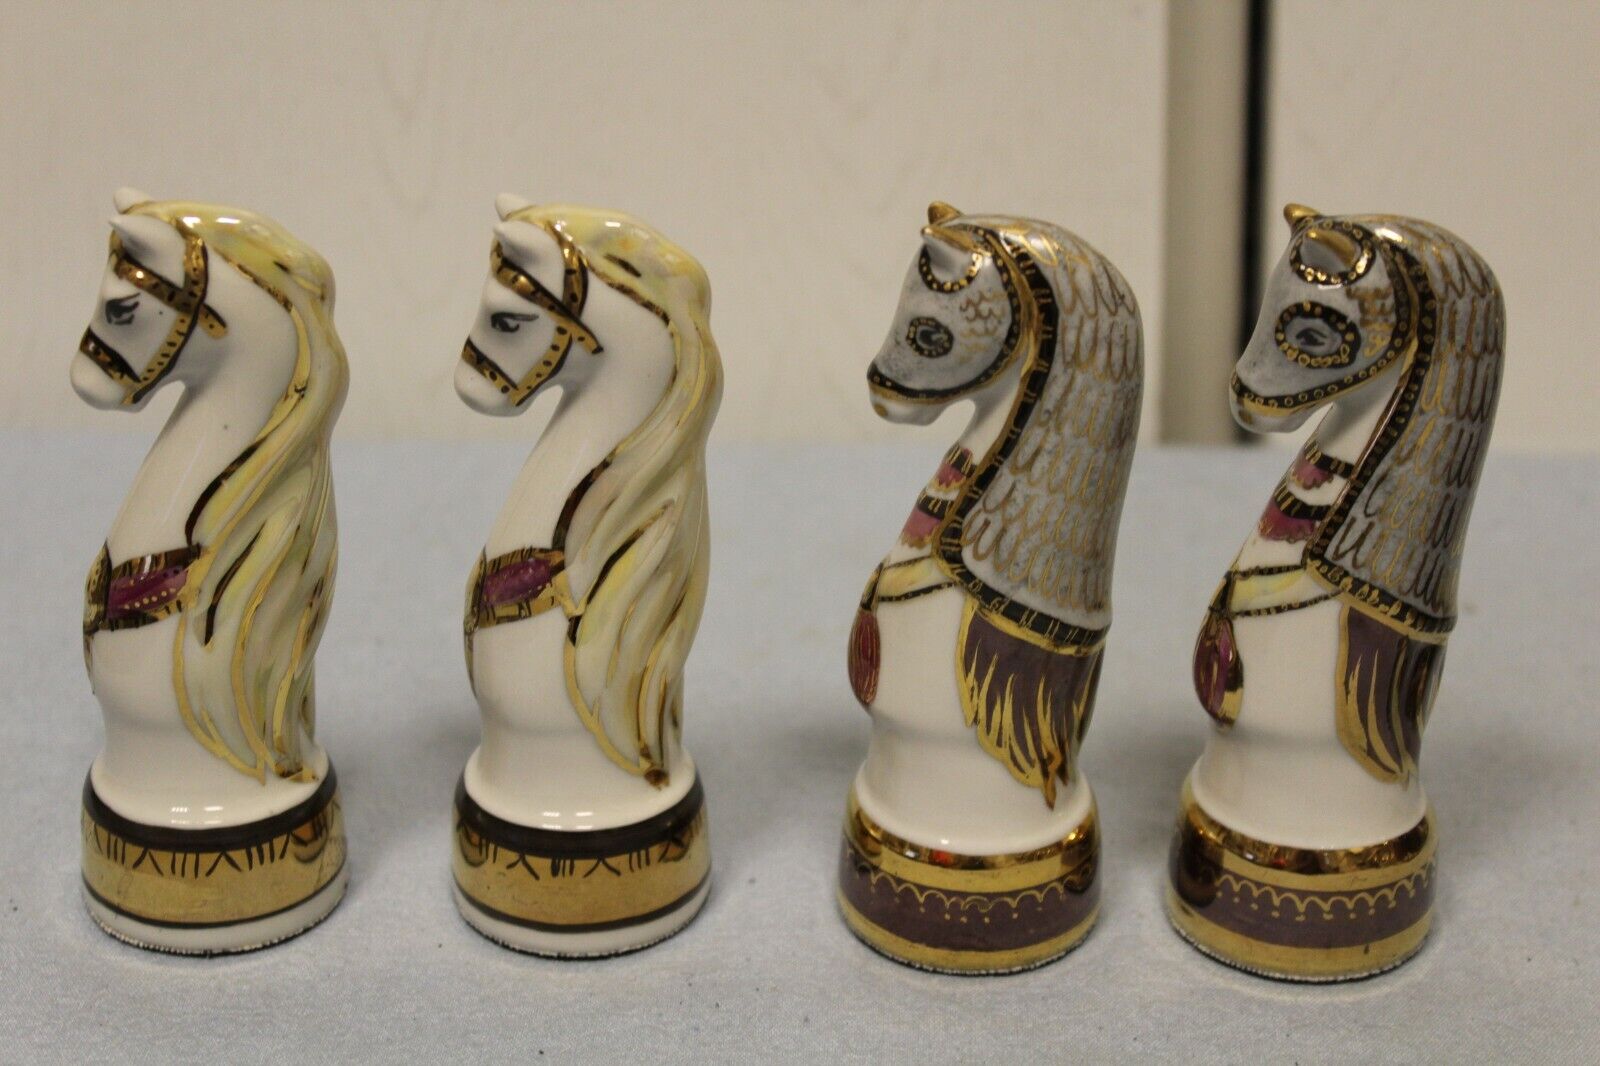 11597.Russian Porcelain Chess Pieces. Very Rare. Absent in Porcelain chess index